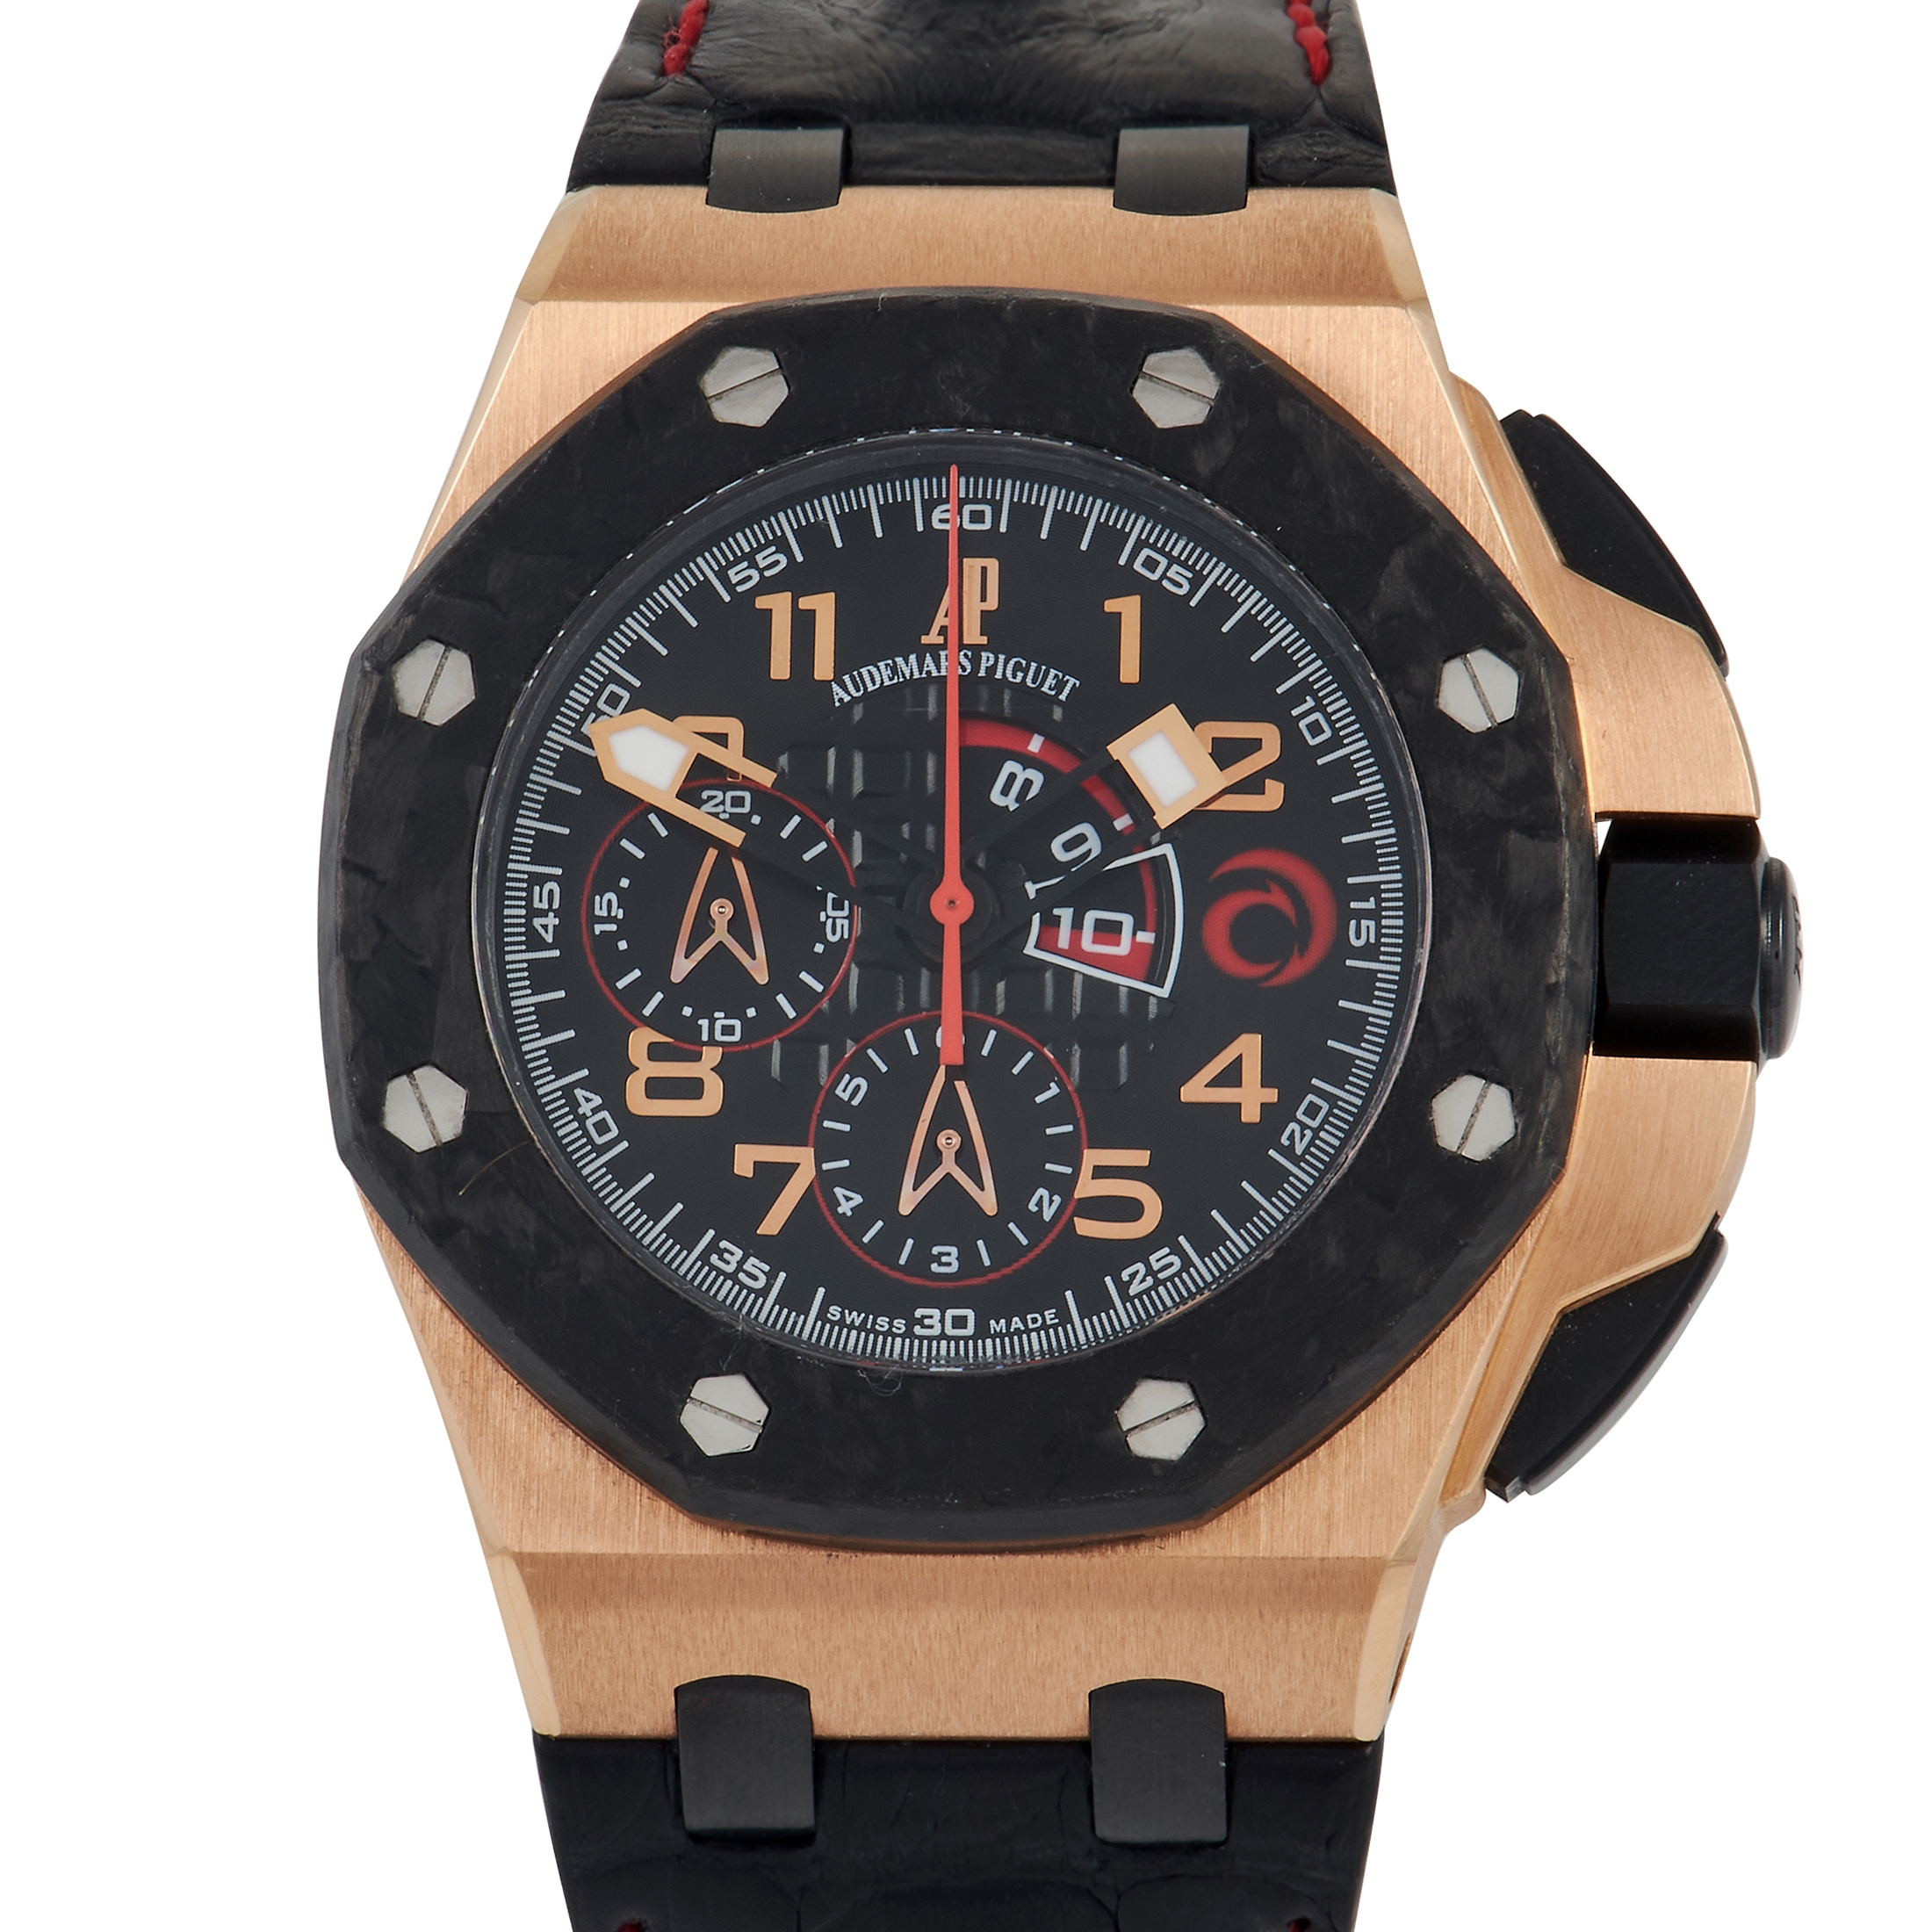 Audemars Piguet Royal Oak Offshore Chronograph Alinghi Team Limited Edition Watch 26062OR.OO.A002CA.01